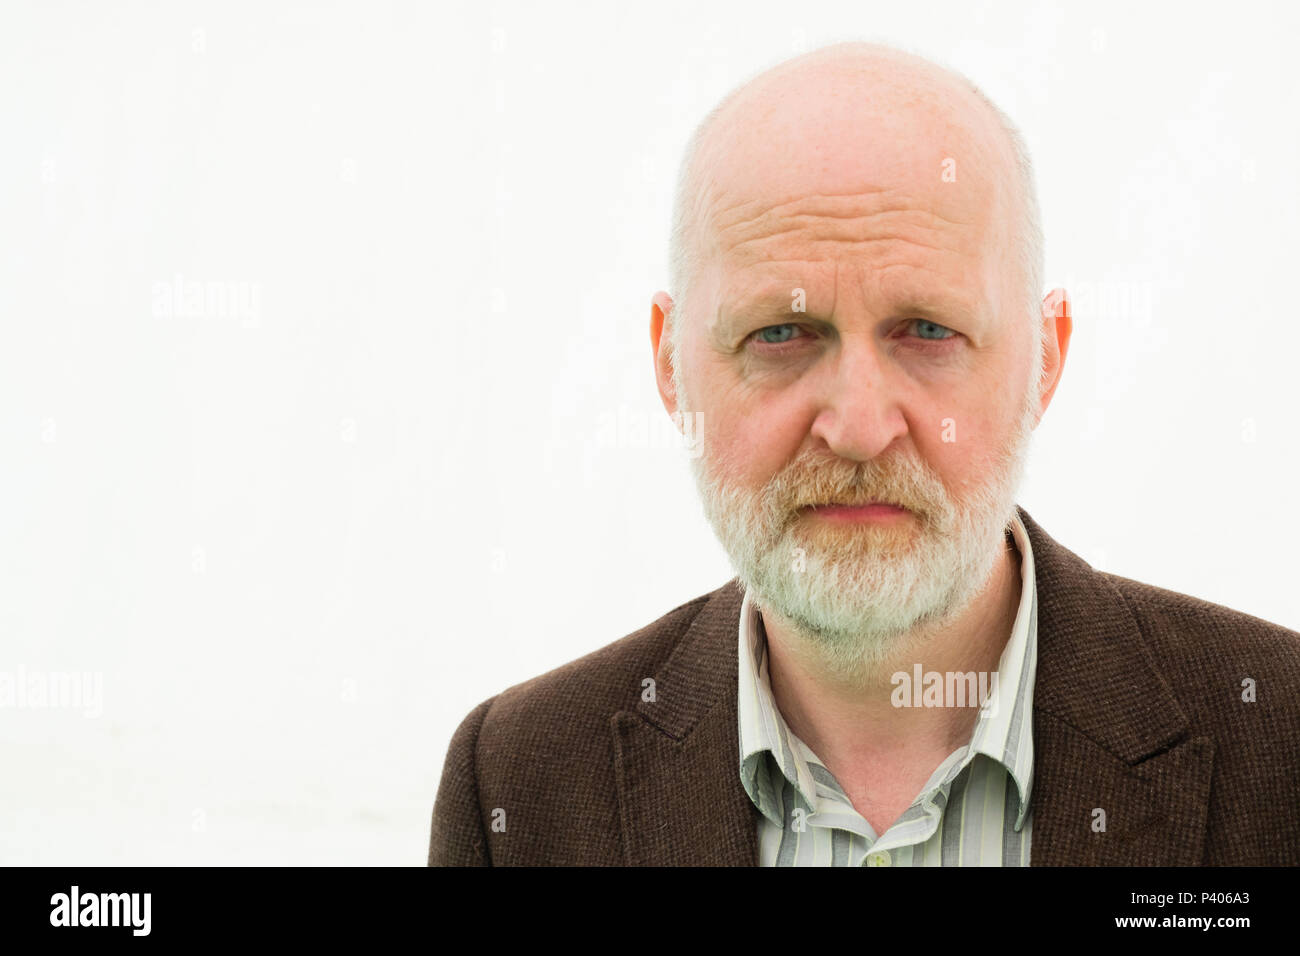 Don Paterson, Scottish poet,  writer, musician, speaking  at the 2018 Hay Festival of Literature and the Arts.  The annual festival  in the small town of Hay on Wye on the Welsh borders , attracts  writers and thinkers from across the globe for 10 days of celebrations of the best of the written word, political though  and literary debate Stock Photo